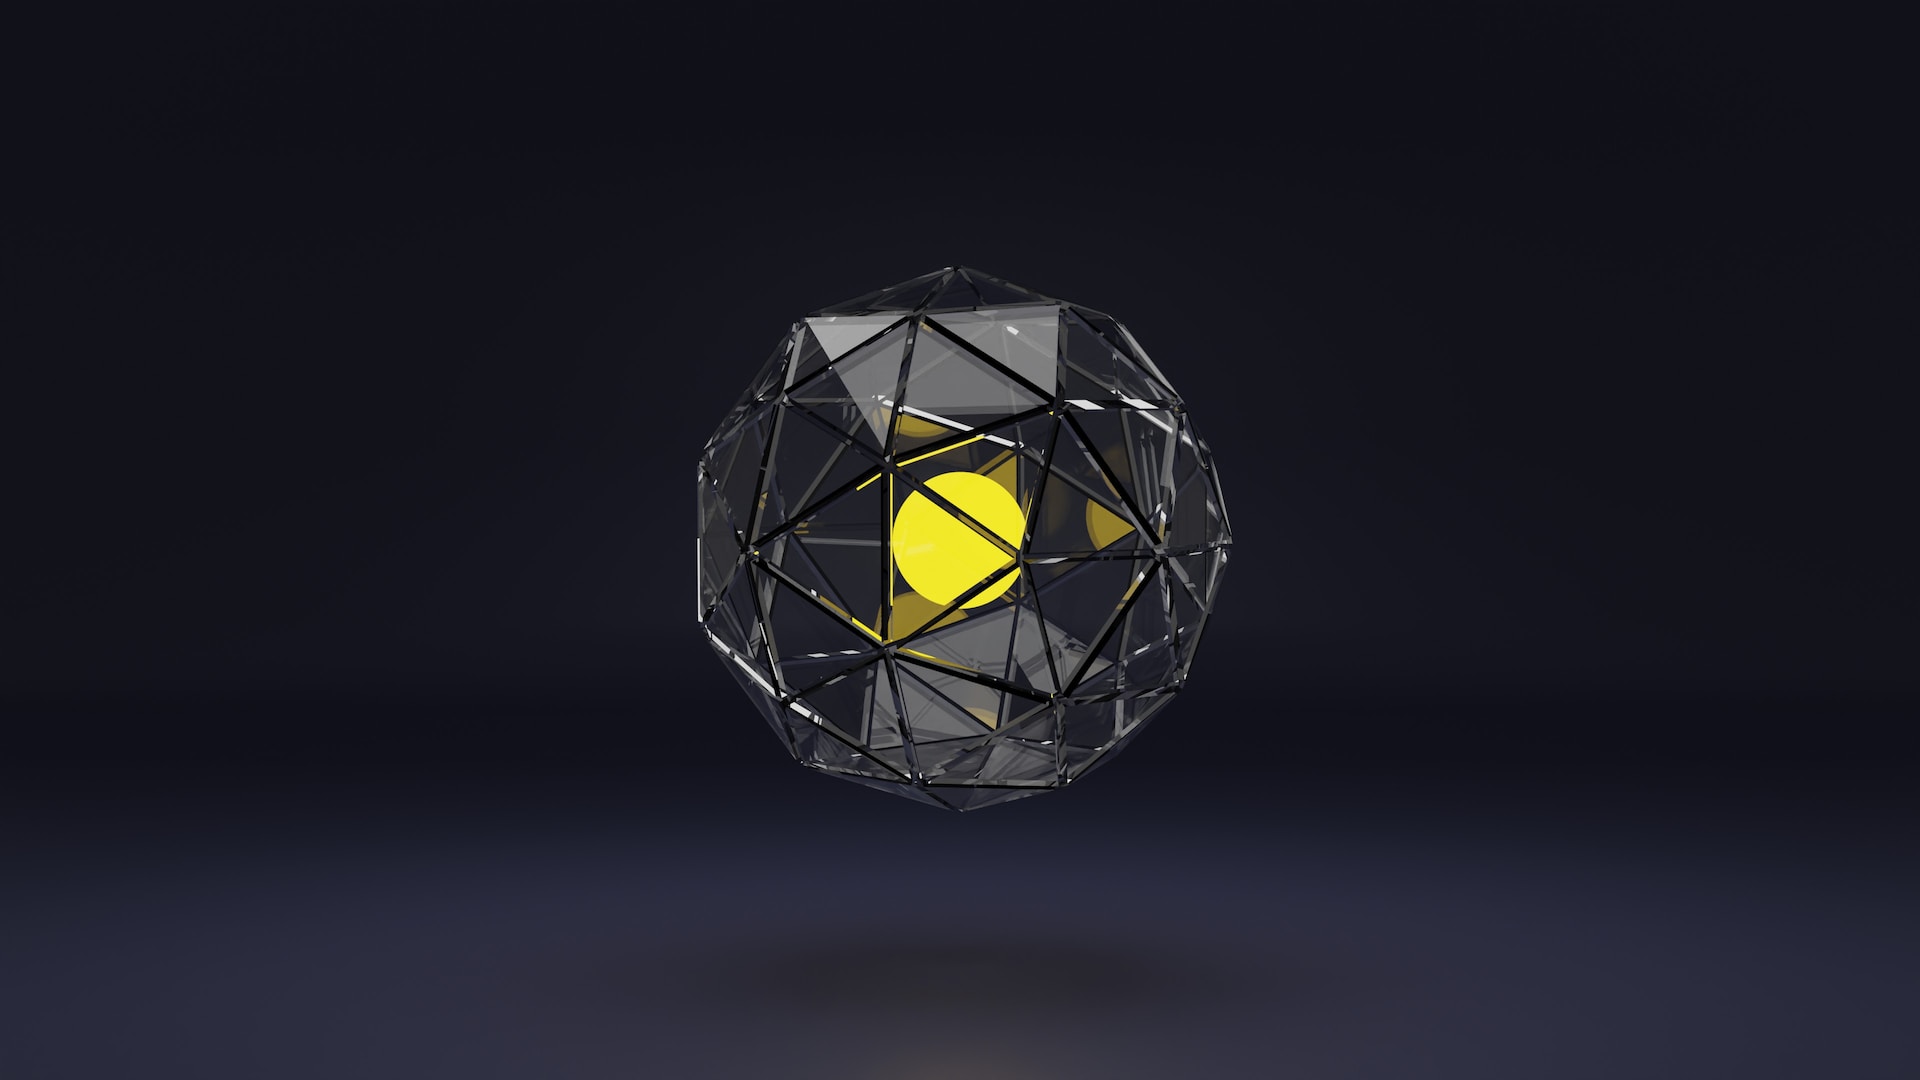 3D image of a yellow circle inside a glass cage